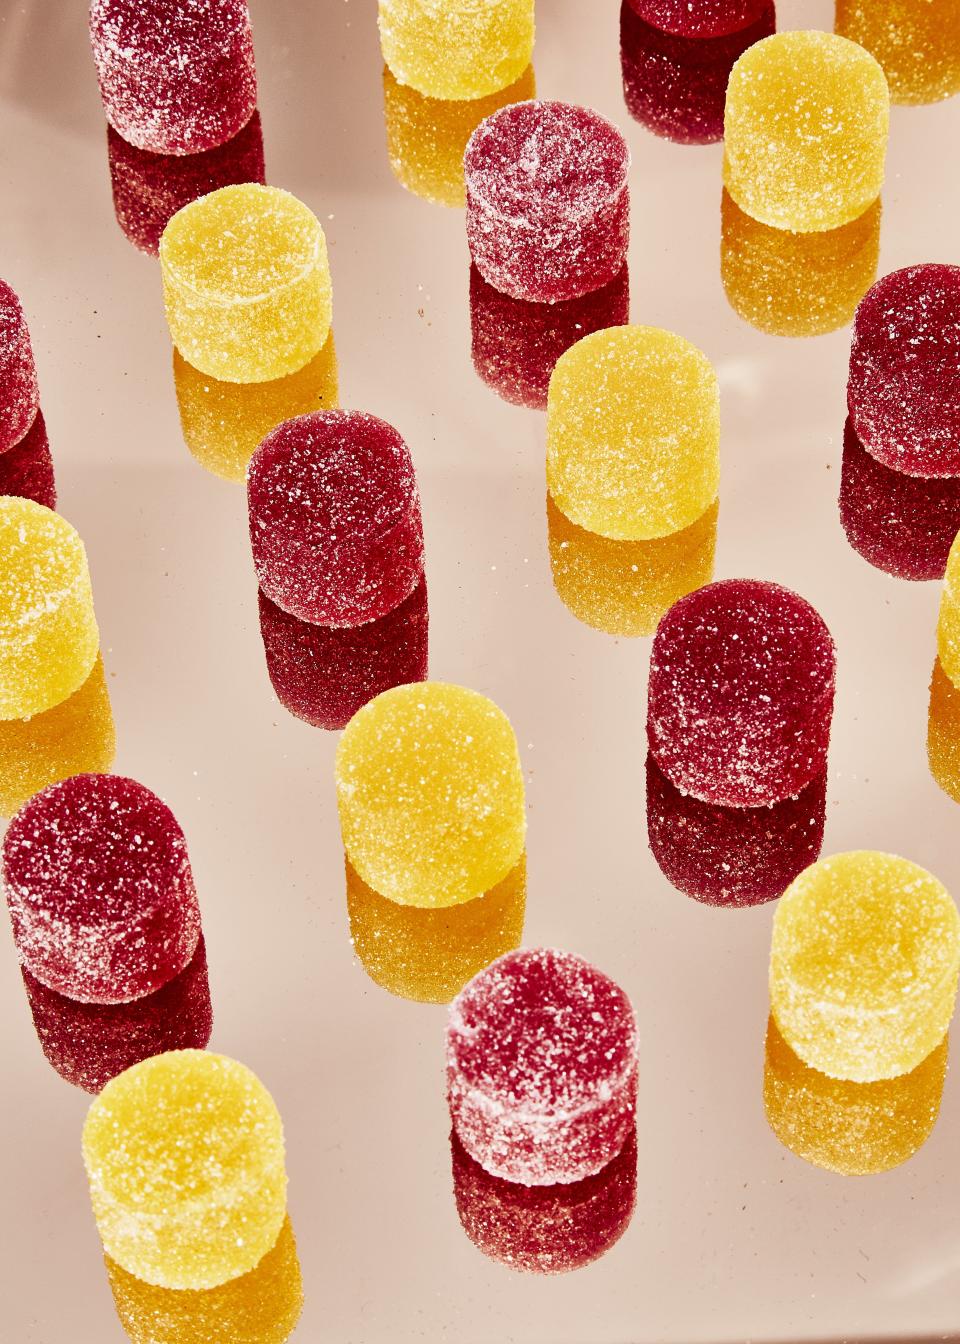 They're the fanciest gumdrops we've ever seen, and they're potent too.